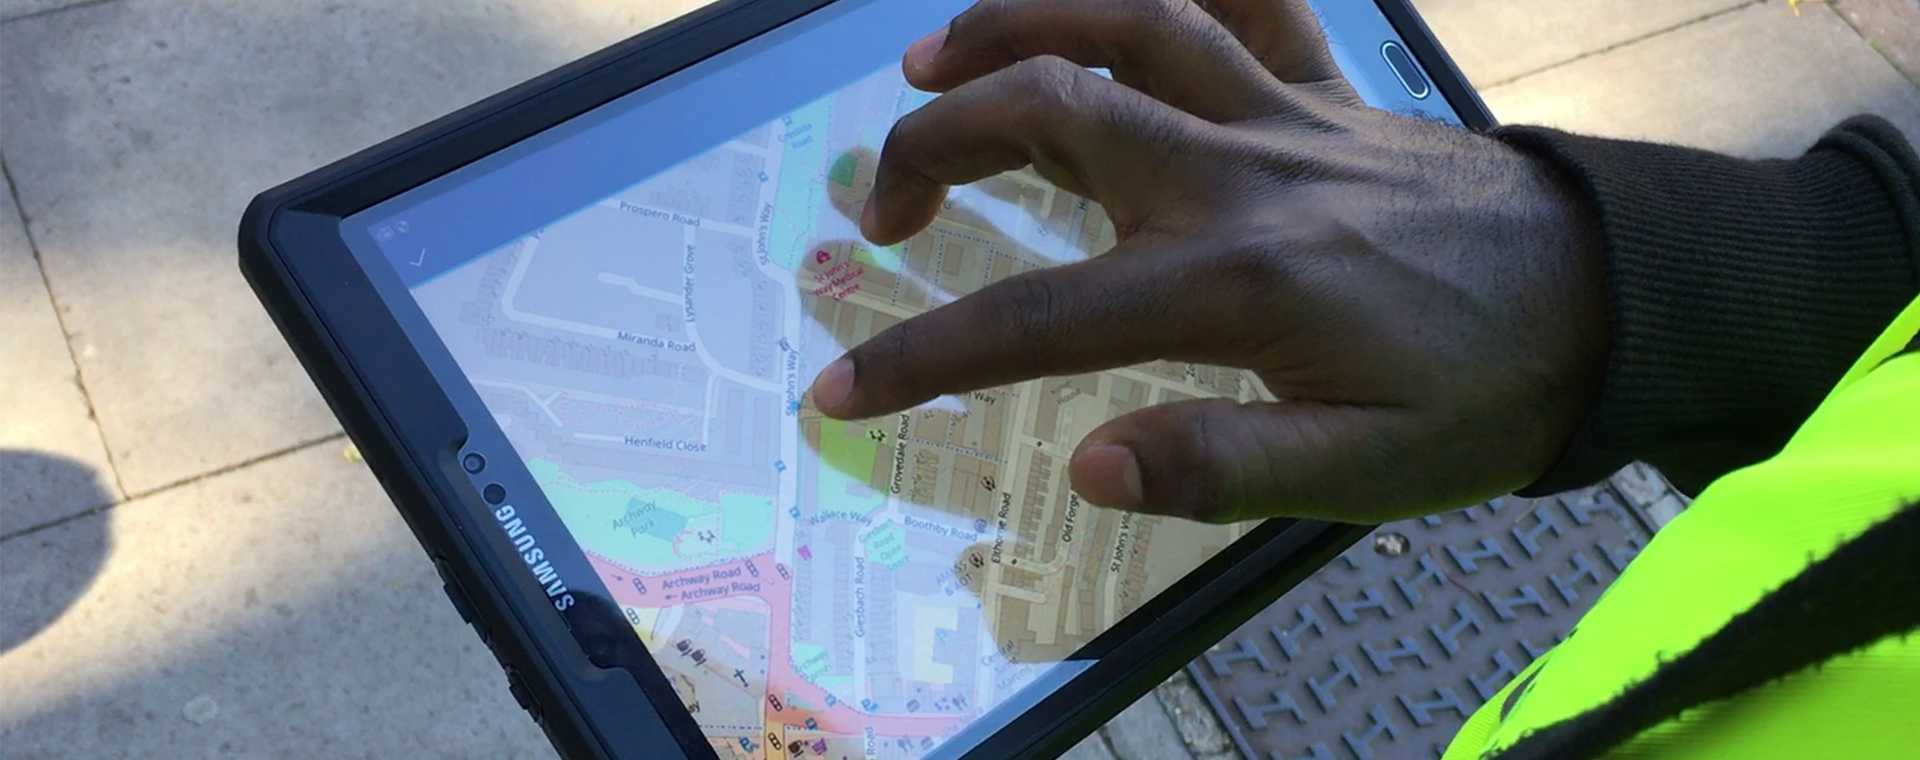 A person using traffic management software on a tablet computer